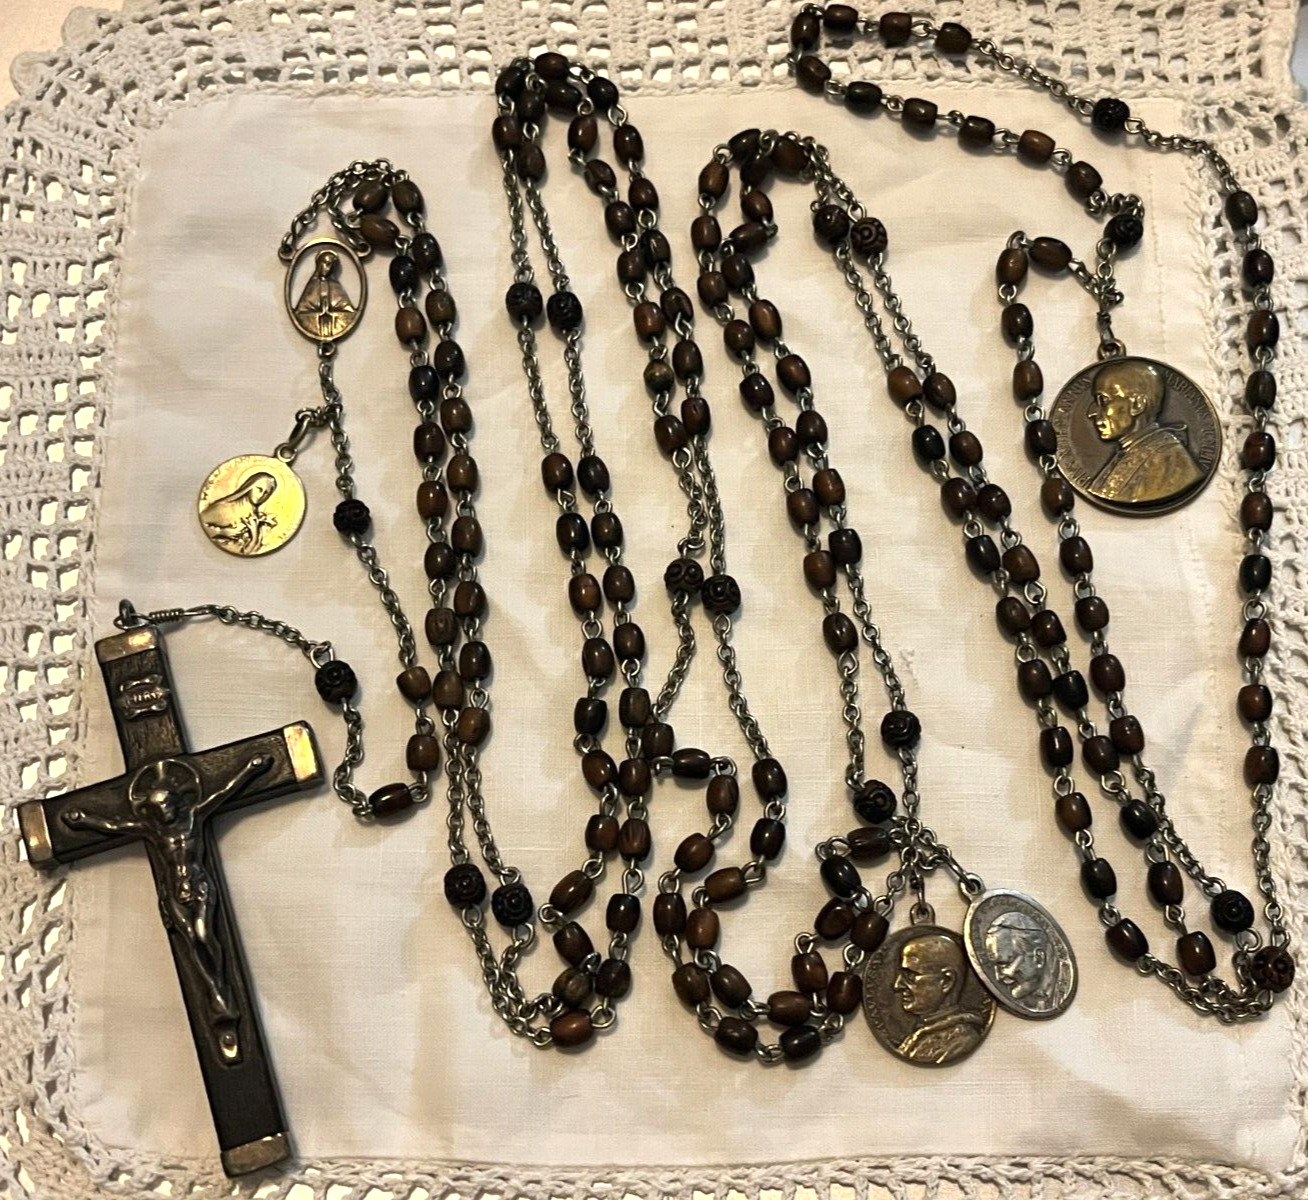 ANTIQUE 1920 CARMELITE NUNS 15 DECADE HABIT ROSARY W/ EXTRA HOLY MEDALS WOW